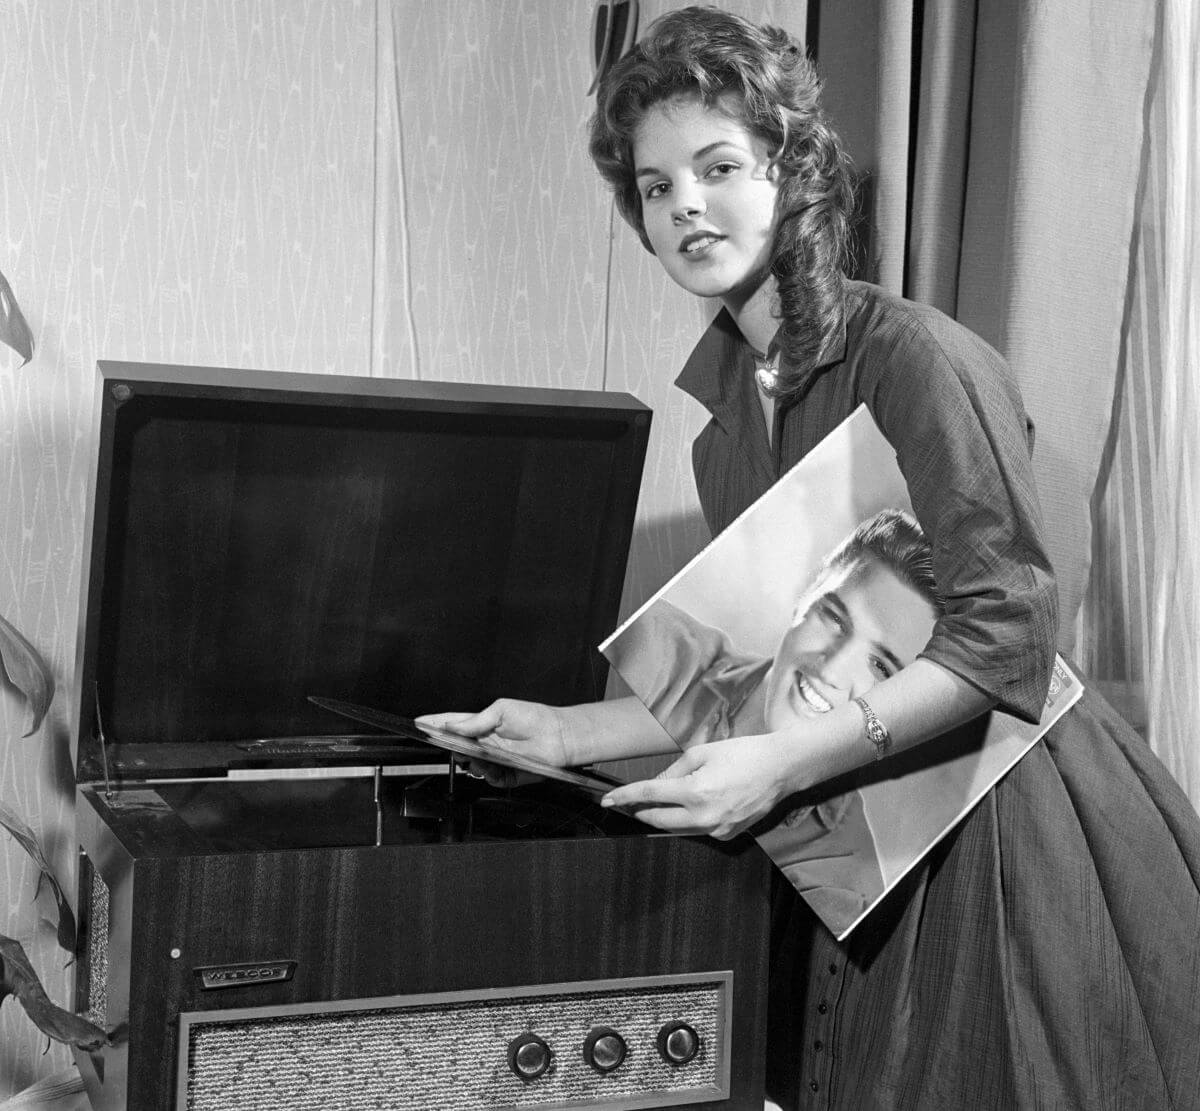 A black and white picture of Priscilla standing over a record player and holding an Elvis record under her arm.